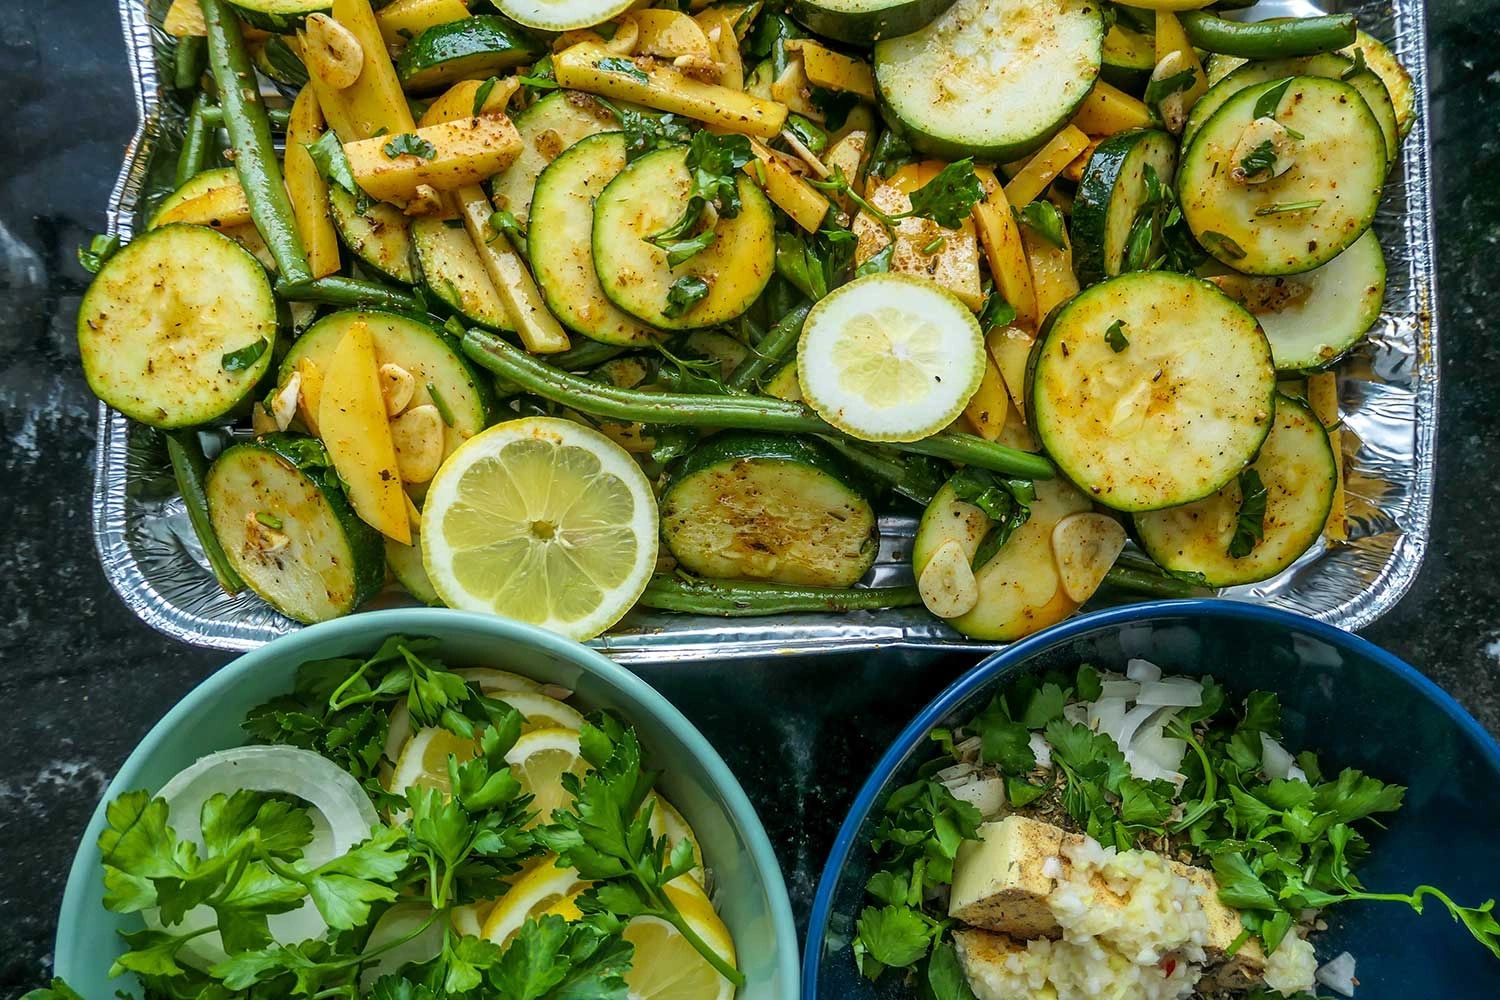 To-go, meal, zucchini, green beans, lemons, foil container, salad, take-out, delivery, fresh, dinner